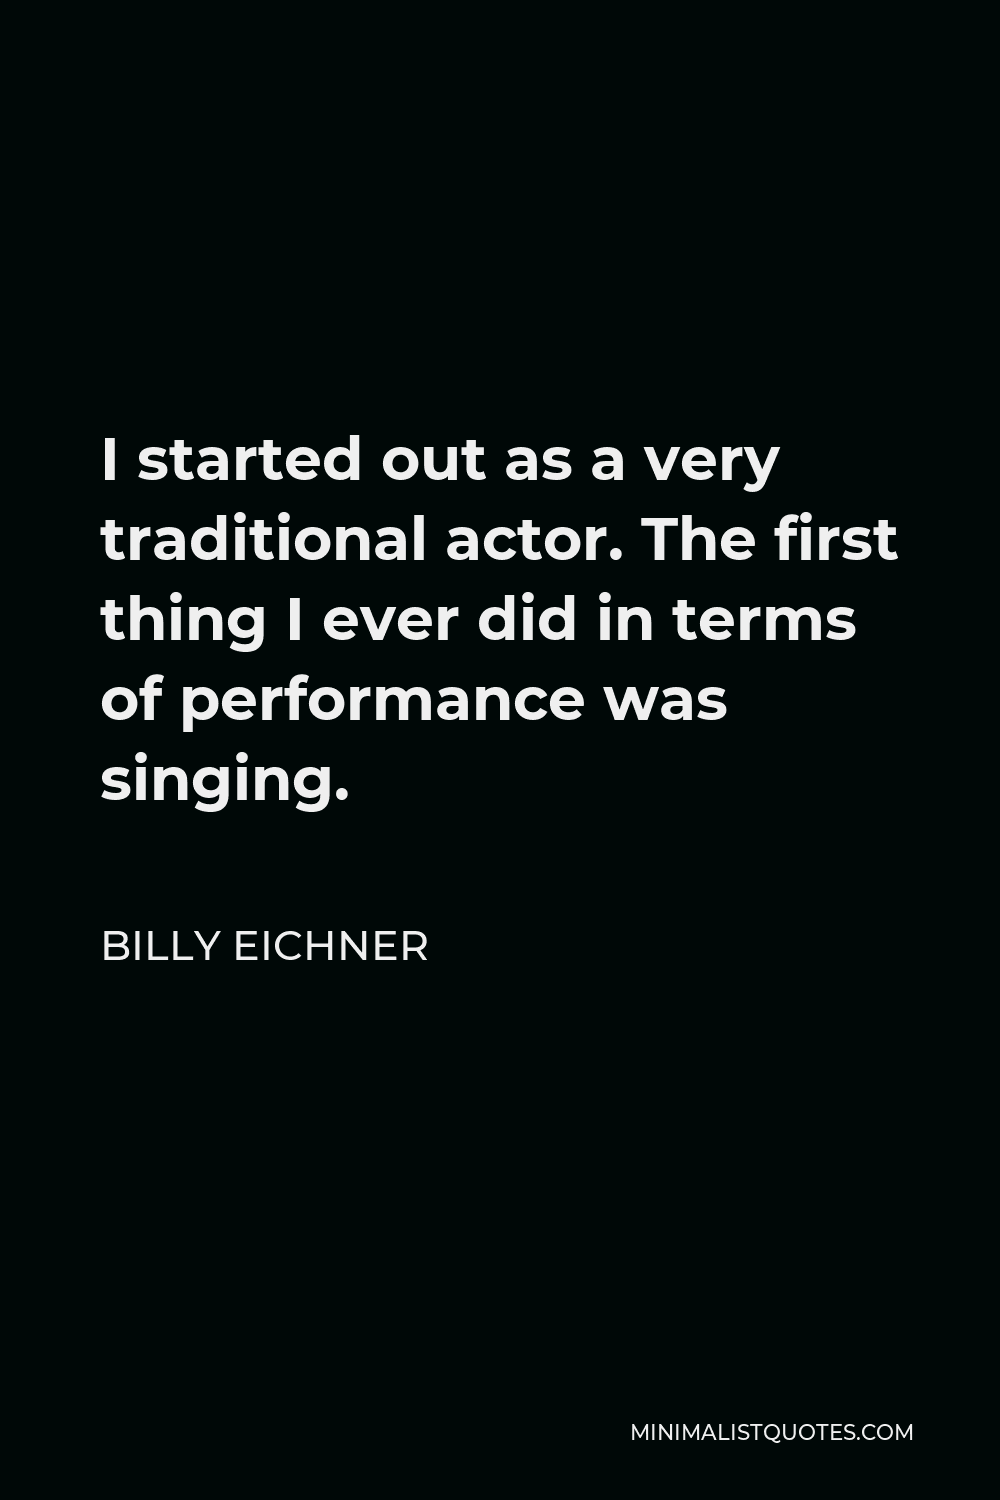 Billy Eichner Quote - I started out as a very traditional actor. The first thing I ever did in terms of performance was singing.